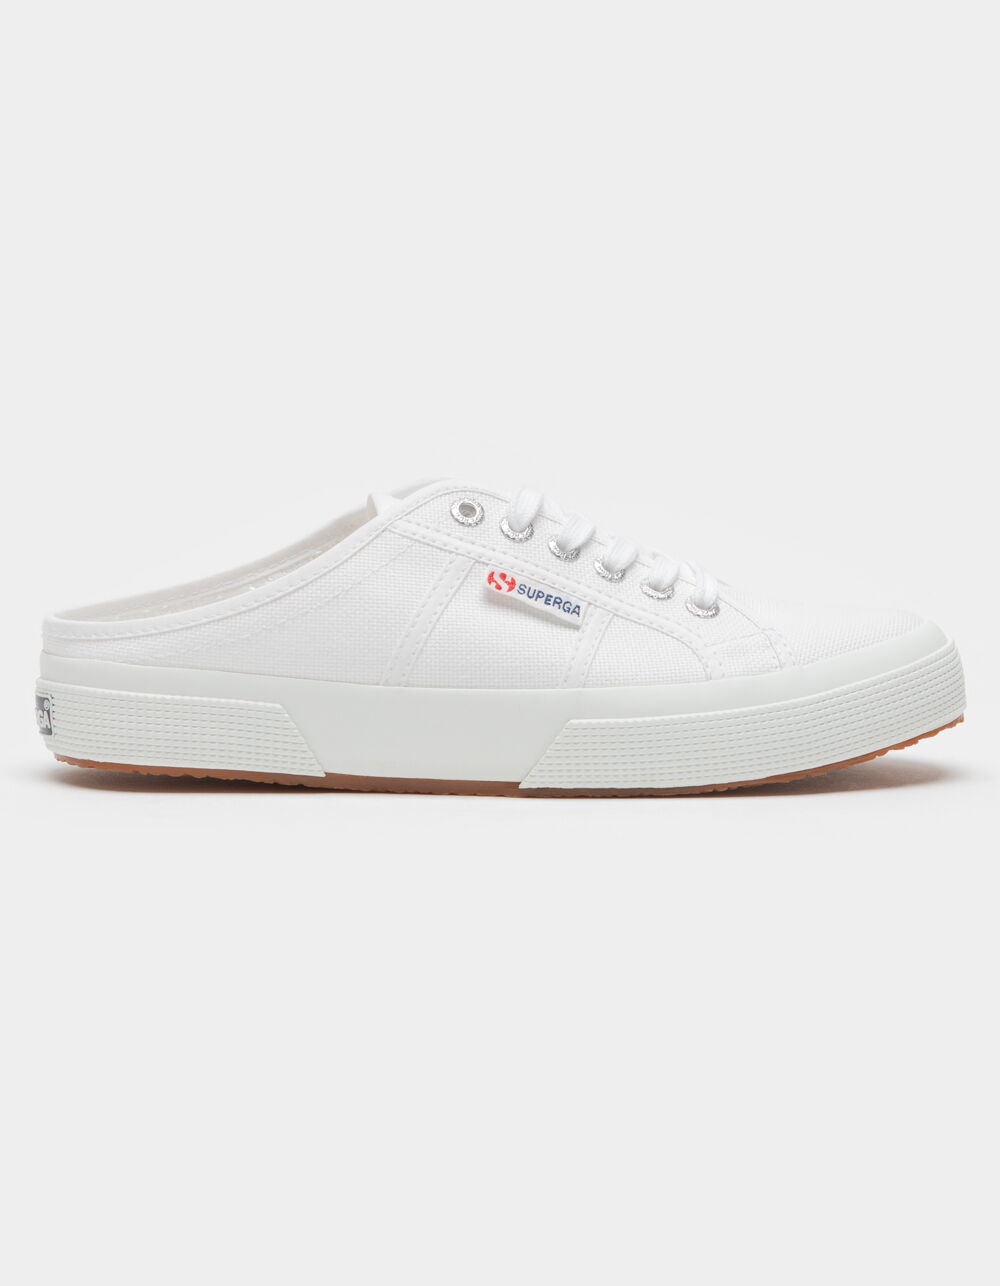 SUPERGA 2402 Mule Womens Shoes - WHITE | Tillys